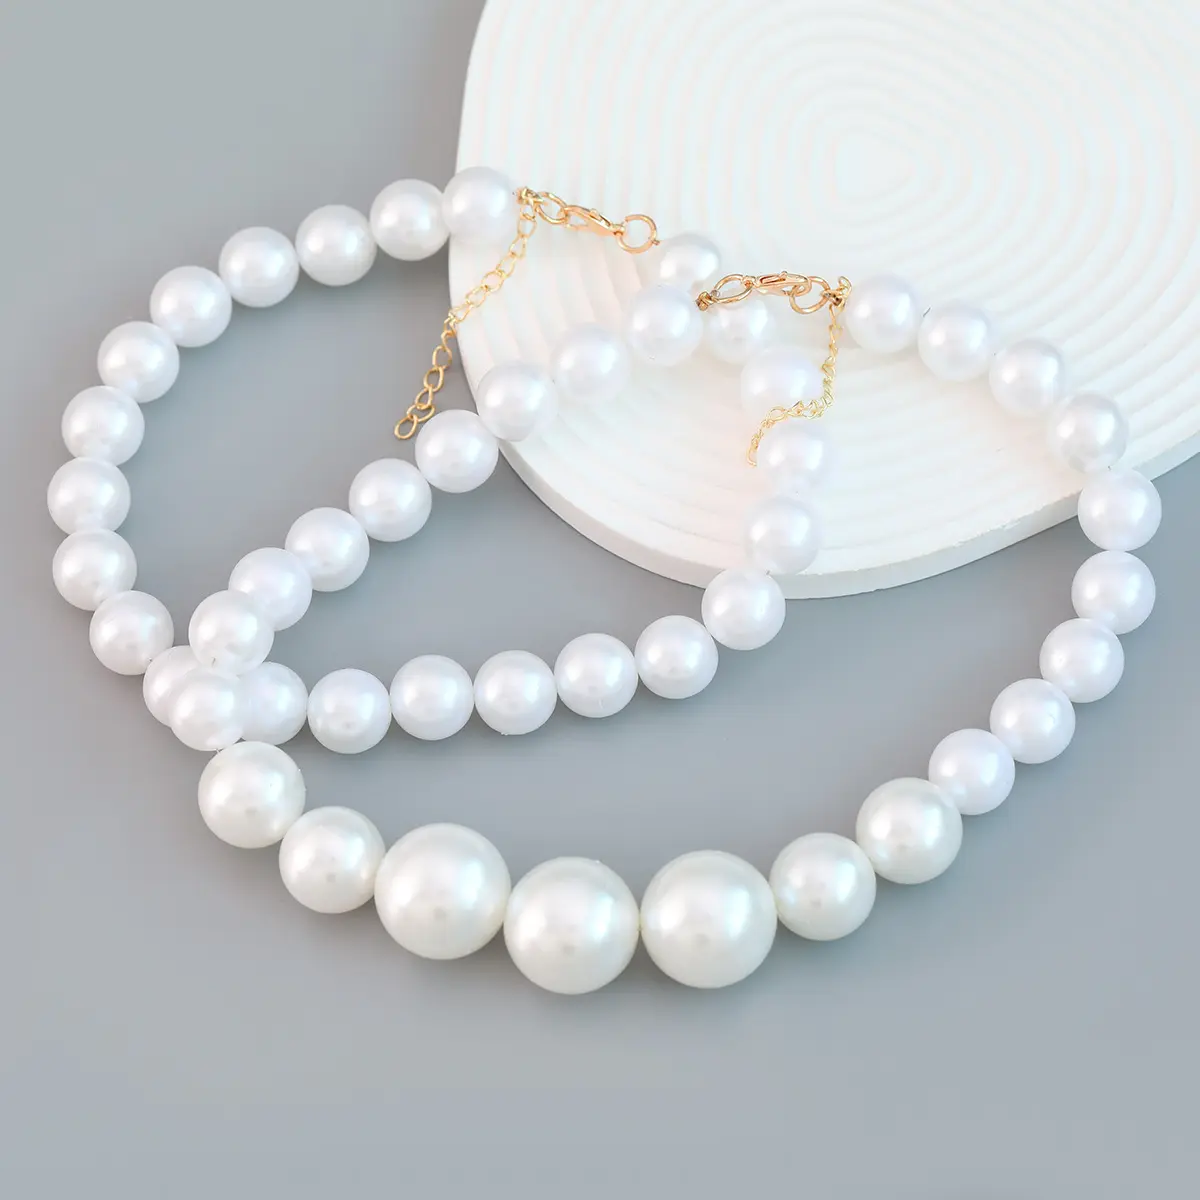 2023 New Arrival Fashion Jewelry Hip Hop Women Large Pearl Necklace Fashion Accessories Two Layered White Pearl Necklaces Set